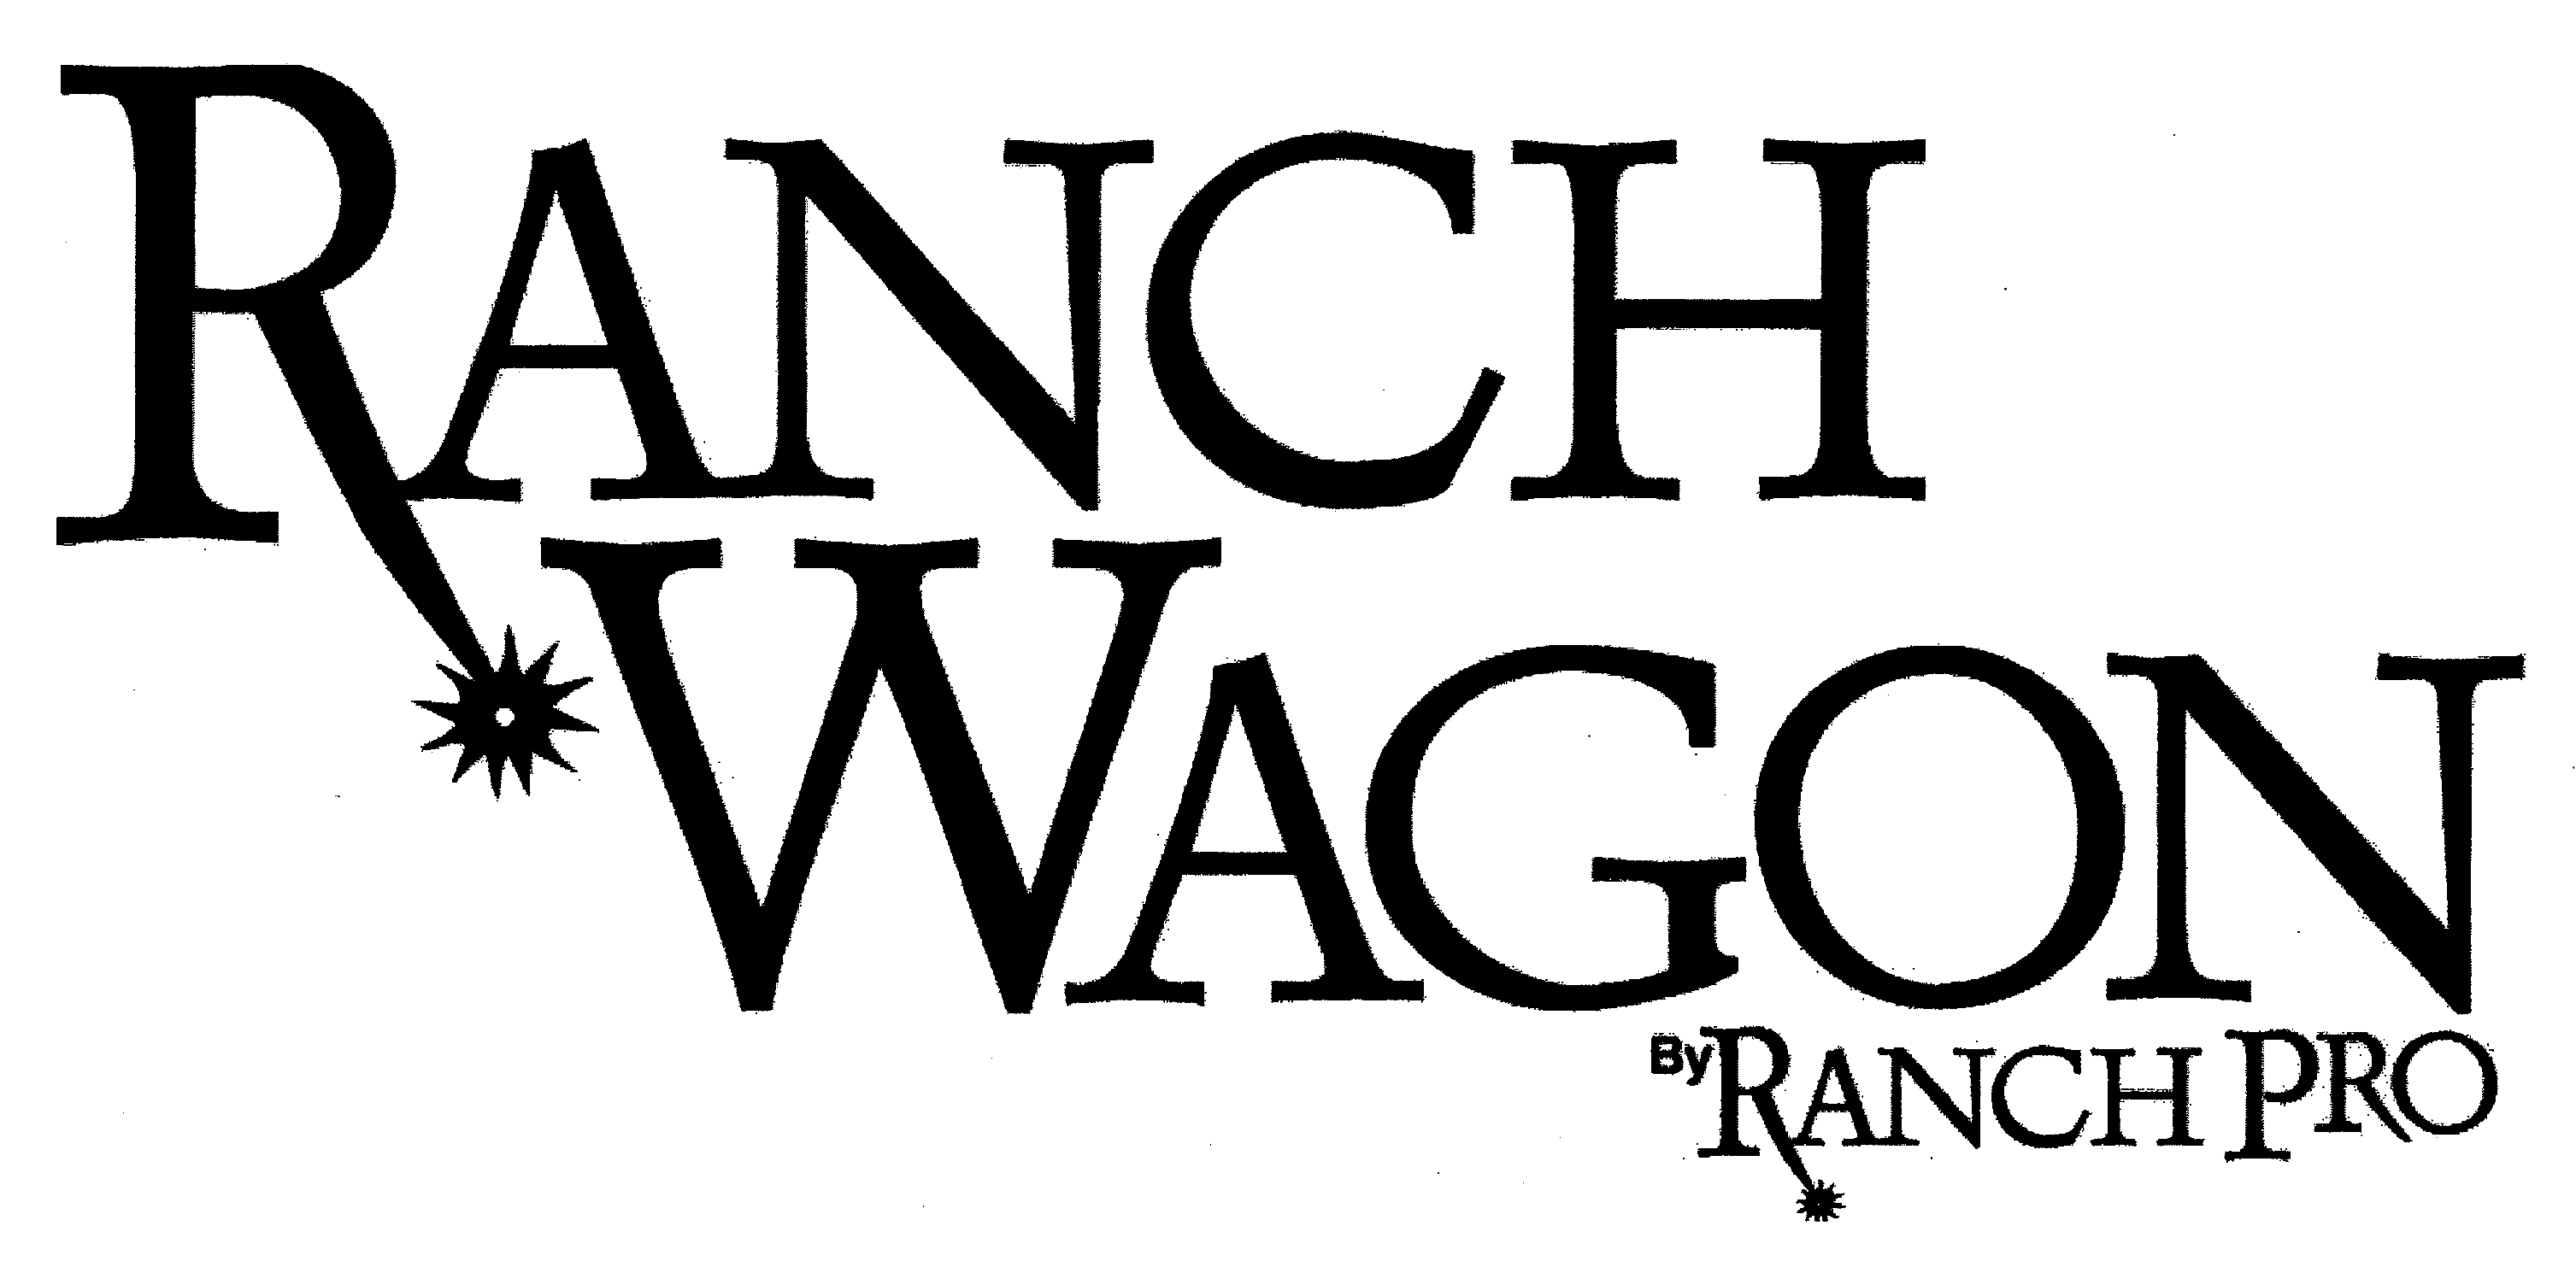 RANCH WAGON BY RANCH PRO